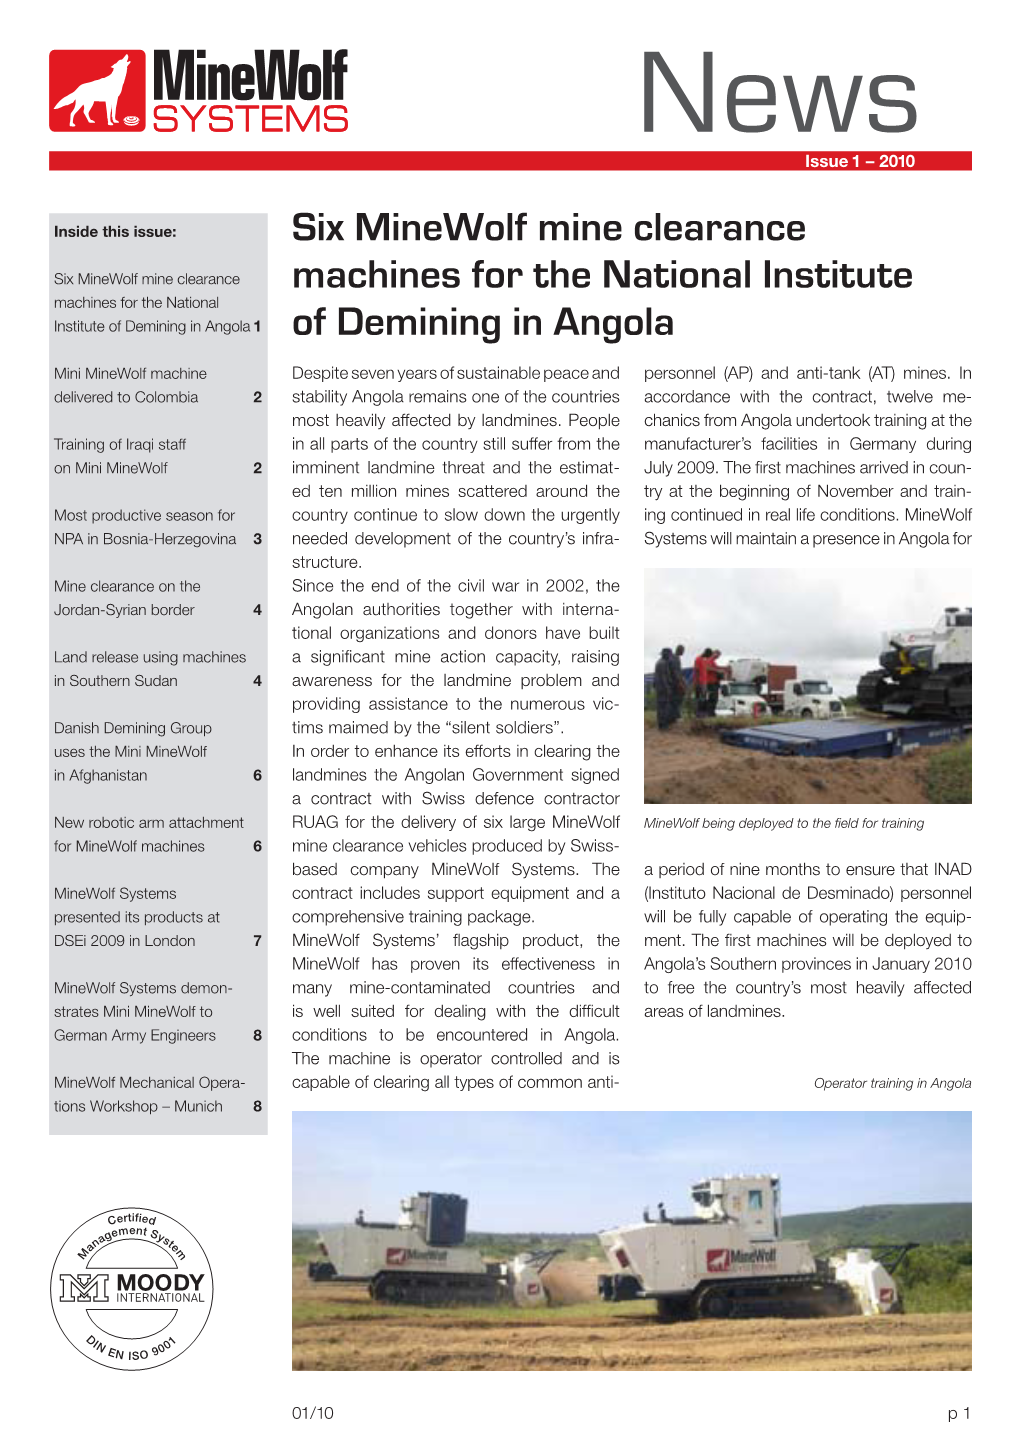 Six Minewolf Mine Clearance Machines for the National Institute Machines for the National Institute of Demining in Angola 1 of Demining in Angola